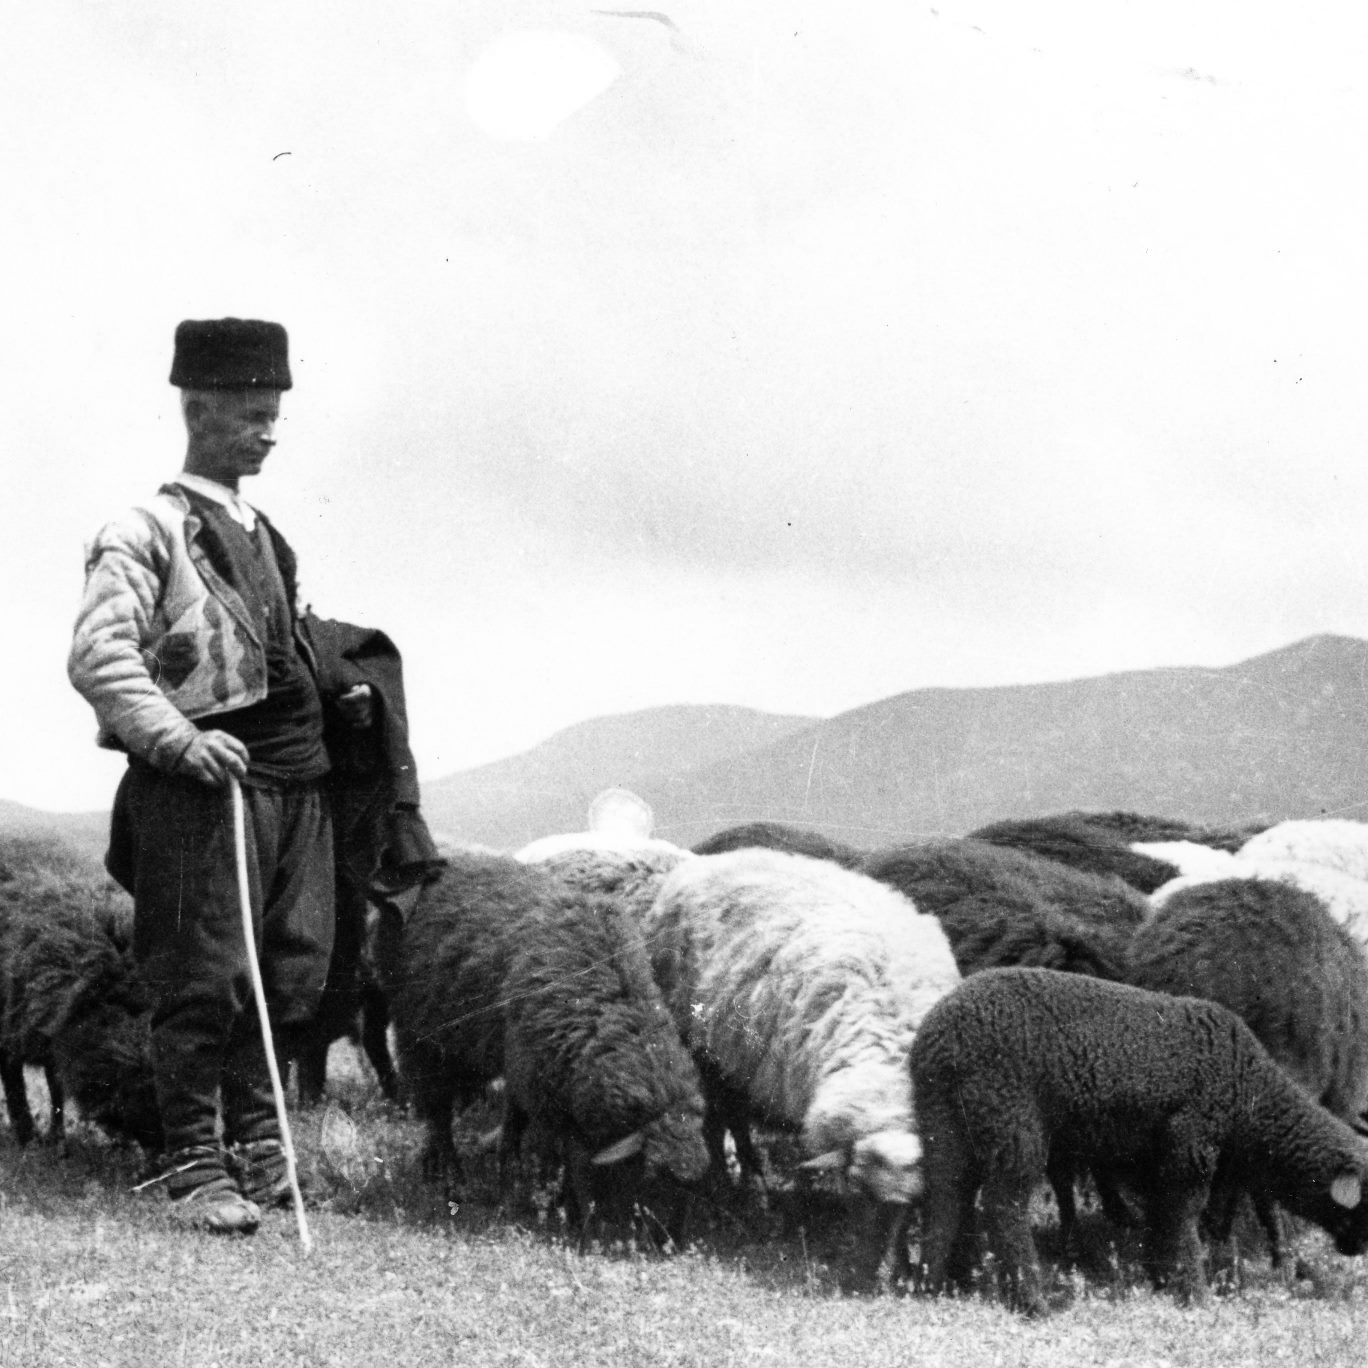 A shepherd with a gag in his hands in front of a flock of sheep.